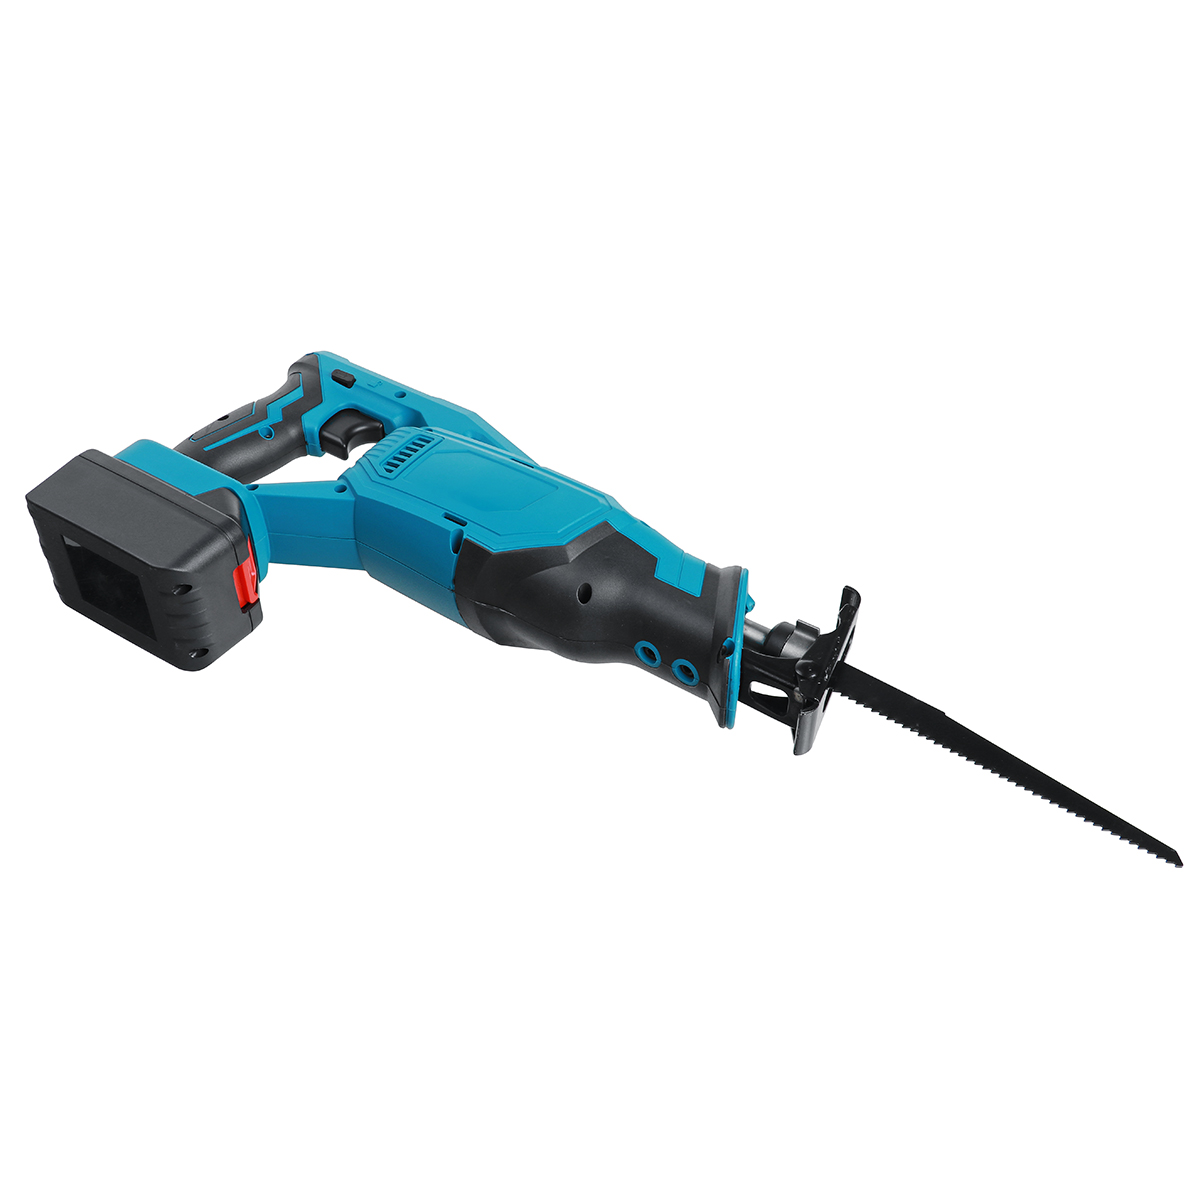 21V-5000Rpm-Reciprocating-Saw-Professional-Electric-Branch-Cutter-Recipro-Saw-W-1pc-Battery-1818077-6